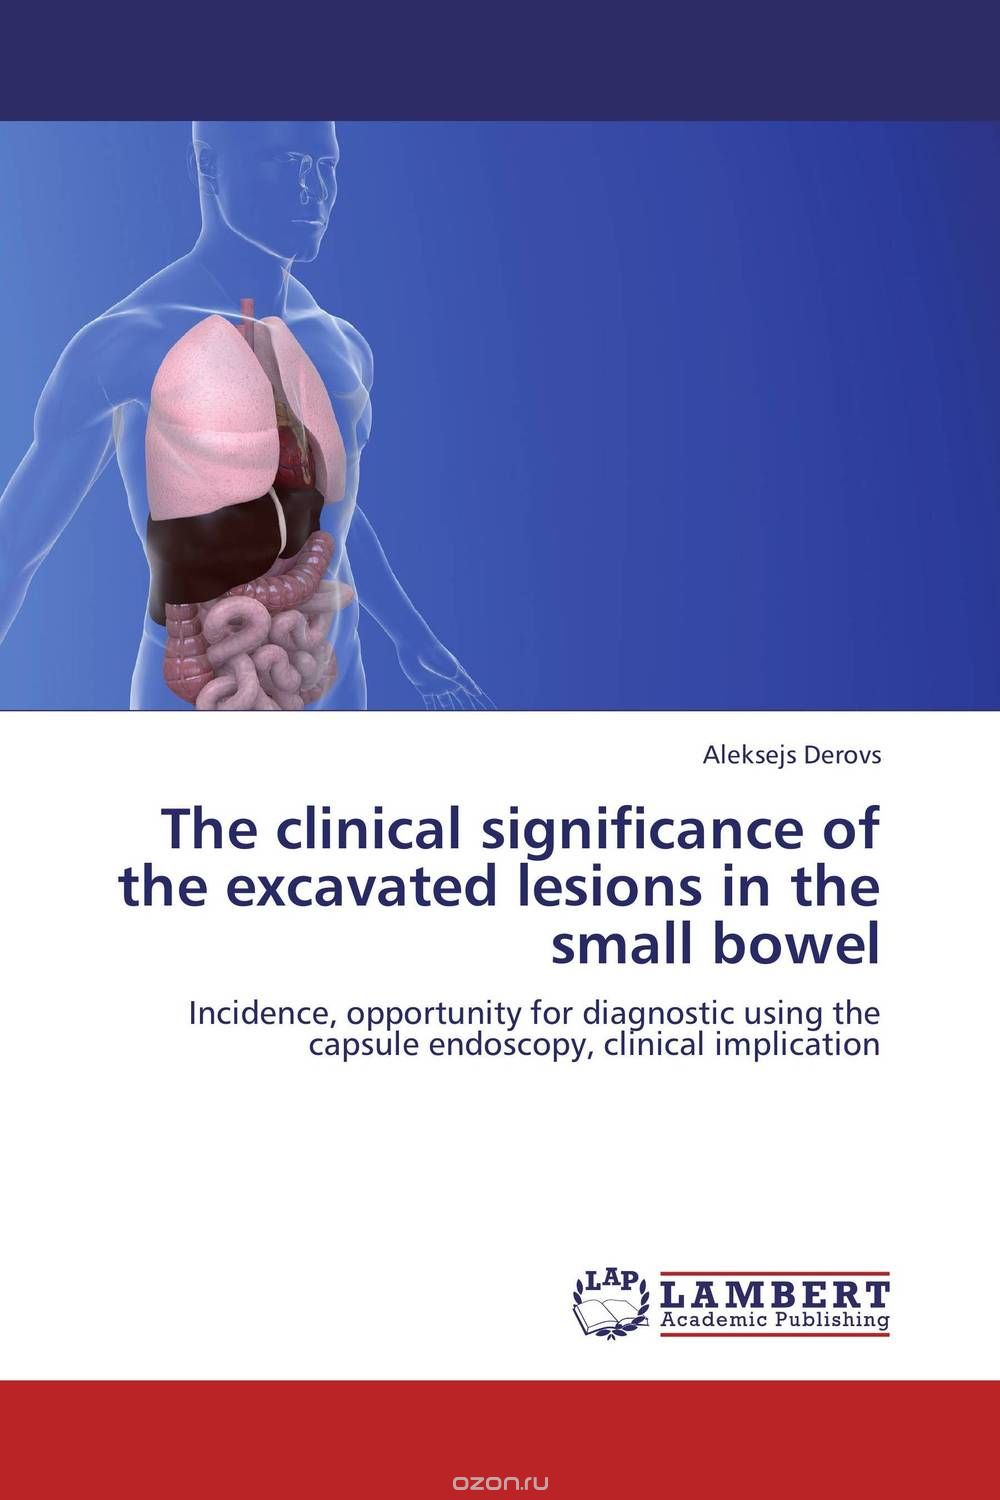 Скачать книгу "The clinical significance of the excavated lesions  in the small bowel"